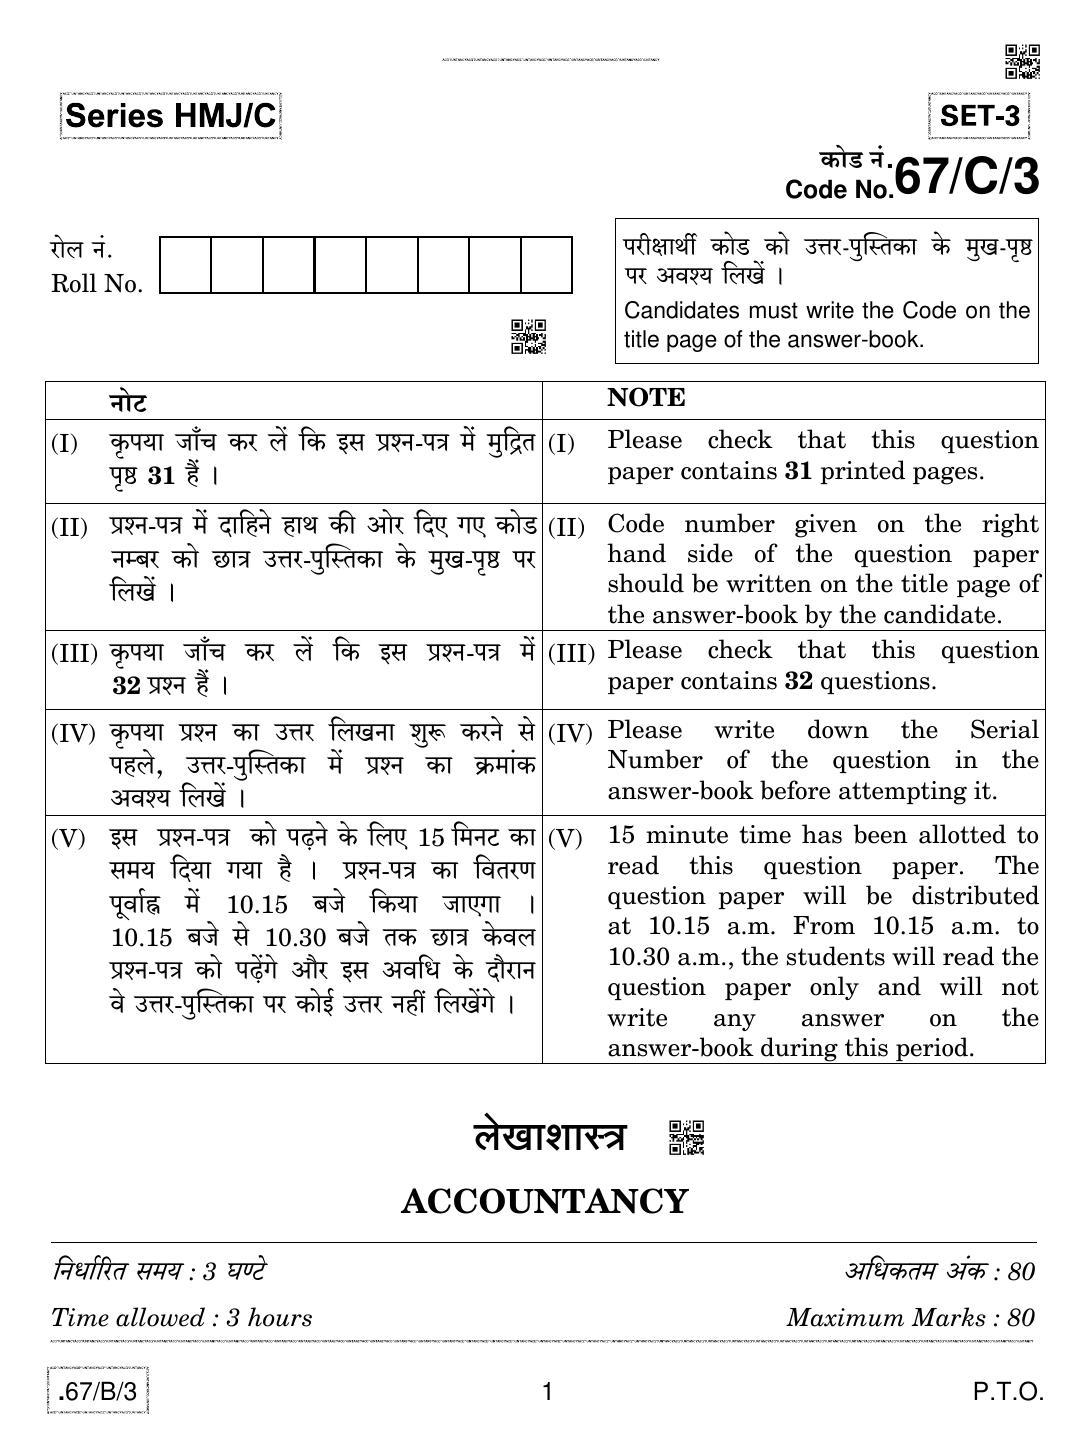 CBSE Class 12 67-C-3 - Accountancy 2020 Compartment Question Paper - Page 1